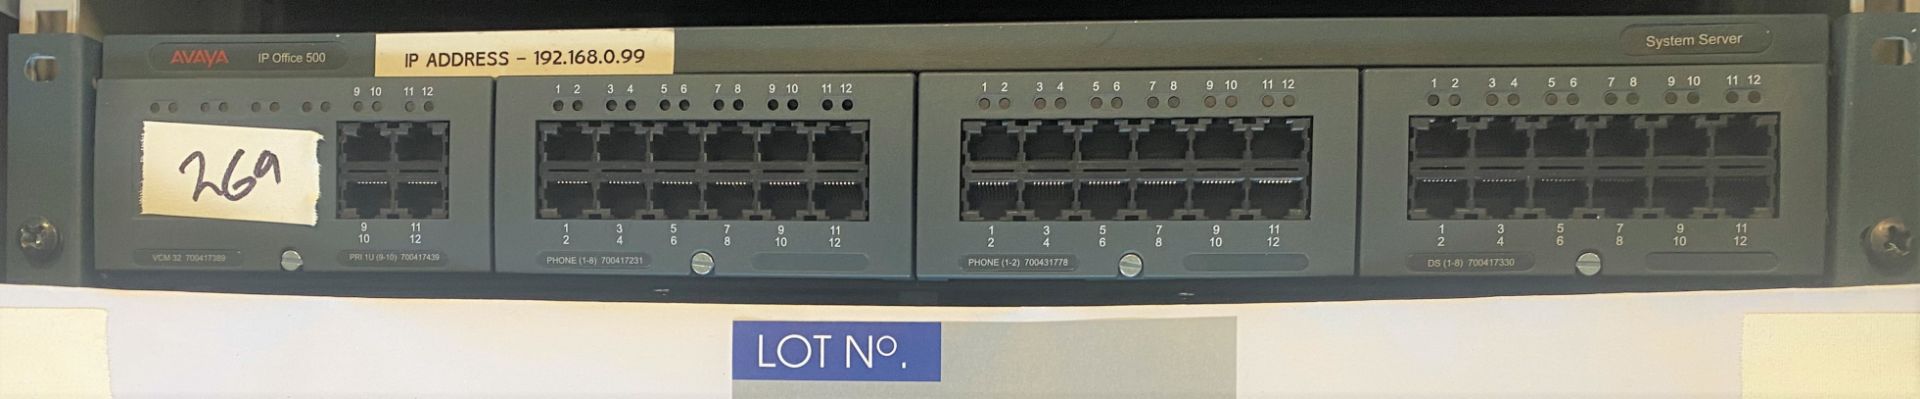 An Avaya IP Office 500 System Server (previously in use).